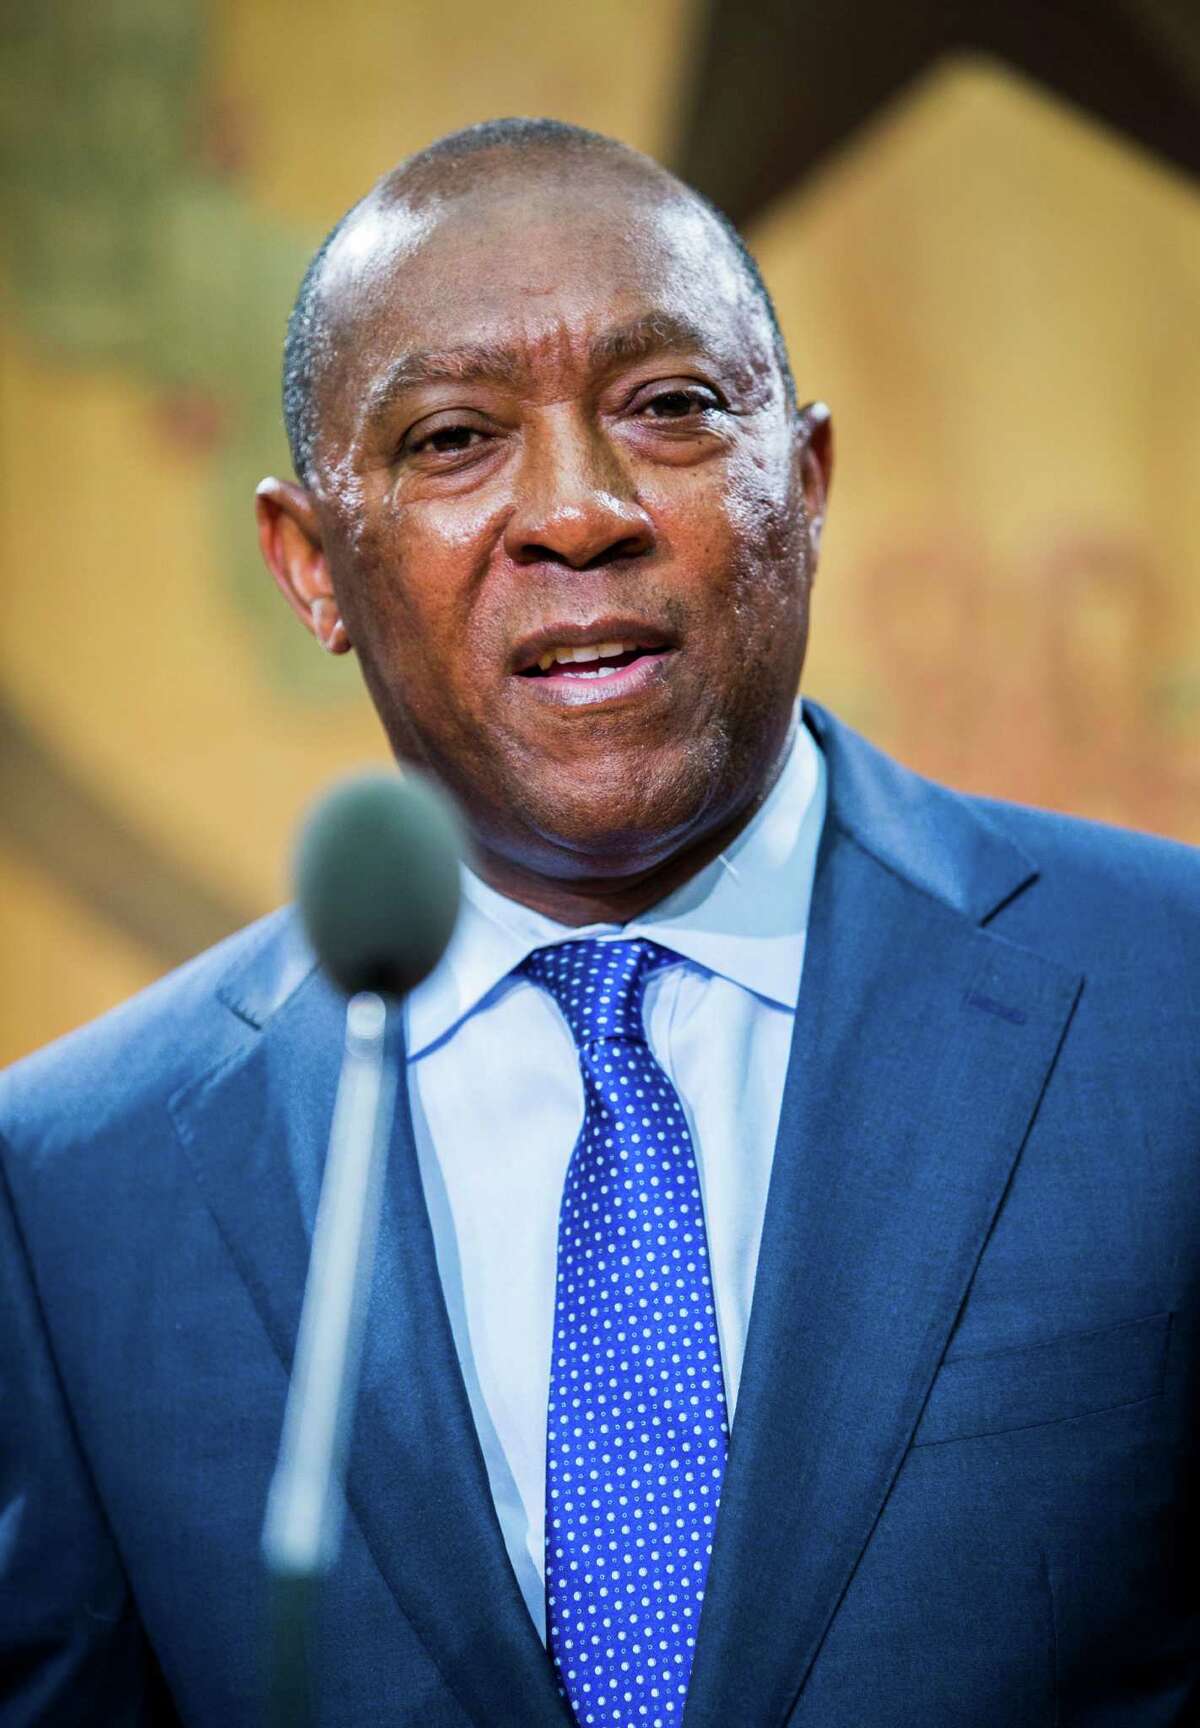 Rep. Sylvester Turner, D-Houston, speaks at a press conference about juvenile justice legislation during the final days of the 84th Texas legislature regular session on Sunday, May 31, 2015 at the Texas state capitol in Austin, Texas. (Ashley Landis/The Dallas Morning News)